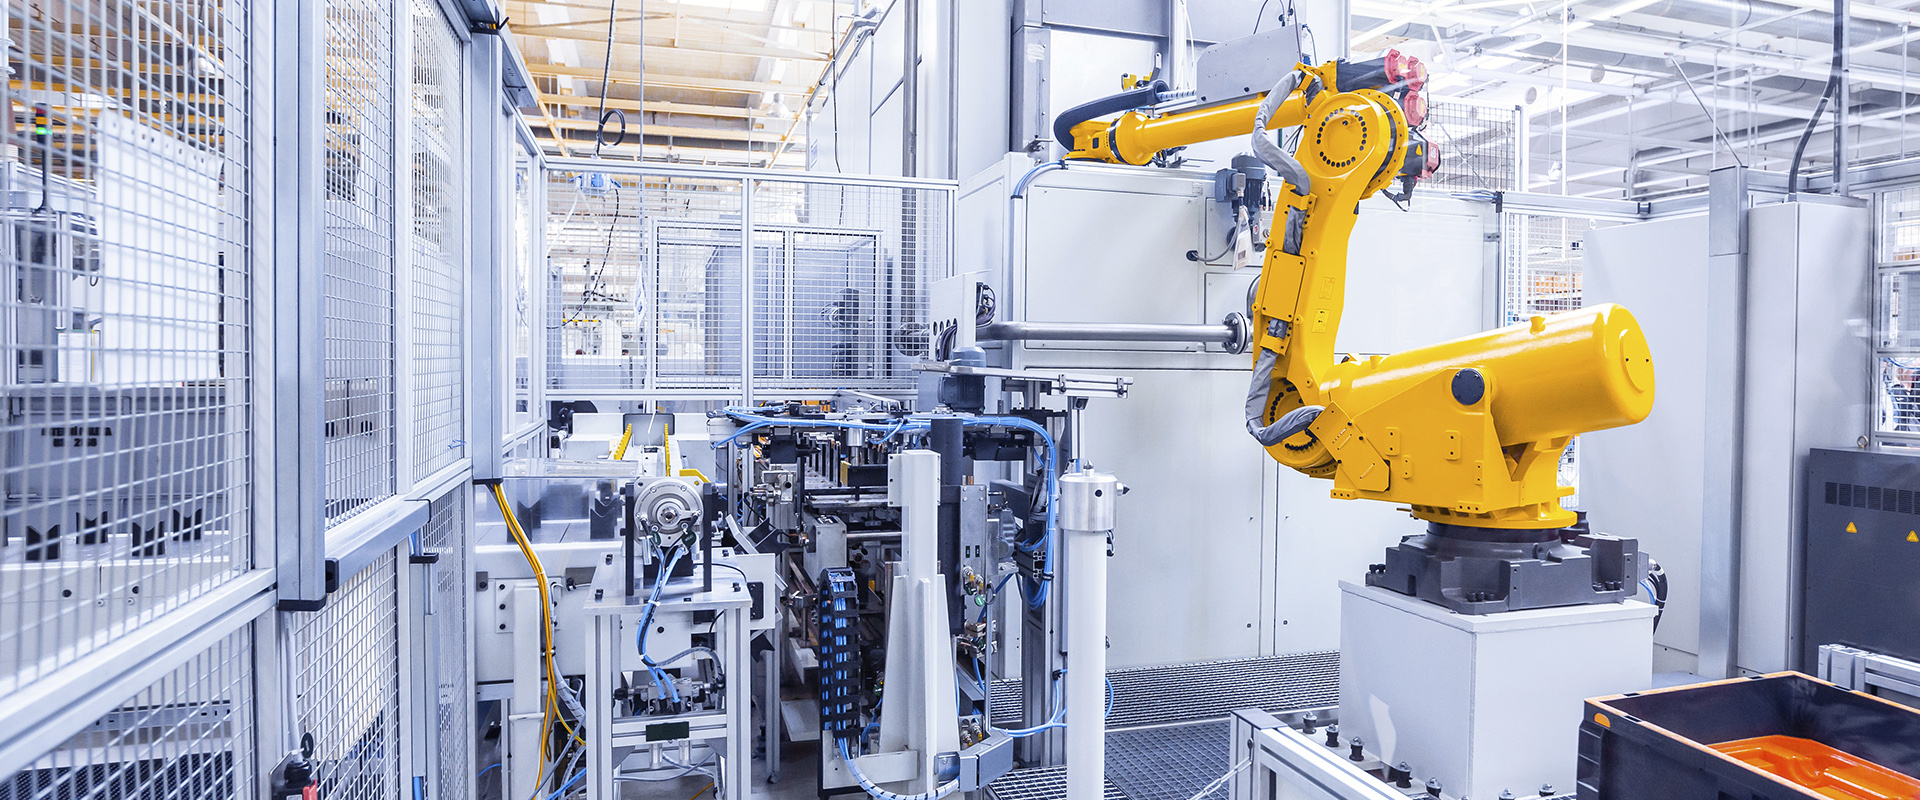 IIoT: The Internet of Things in the Industrial sector